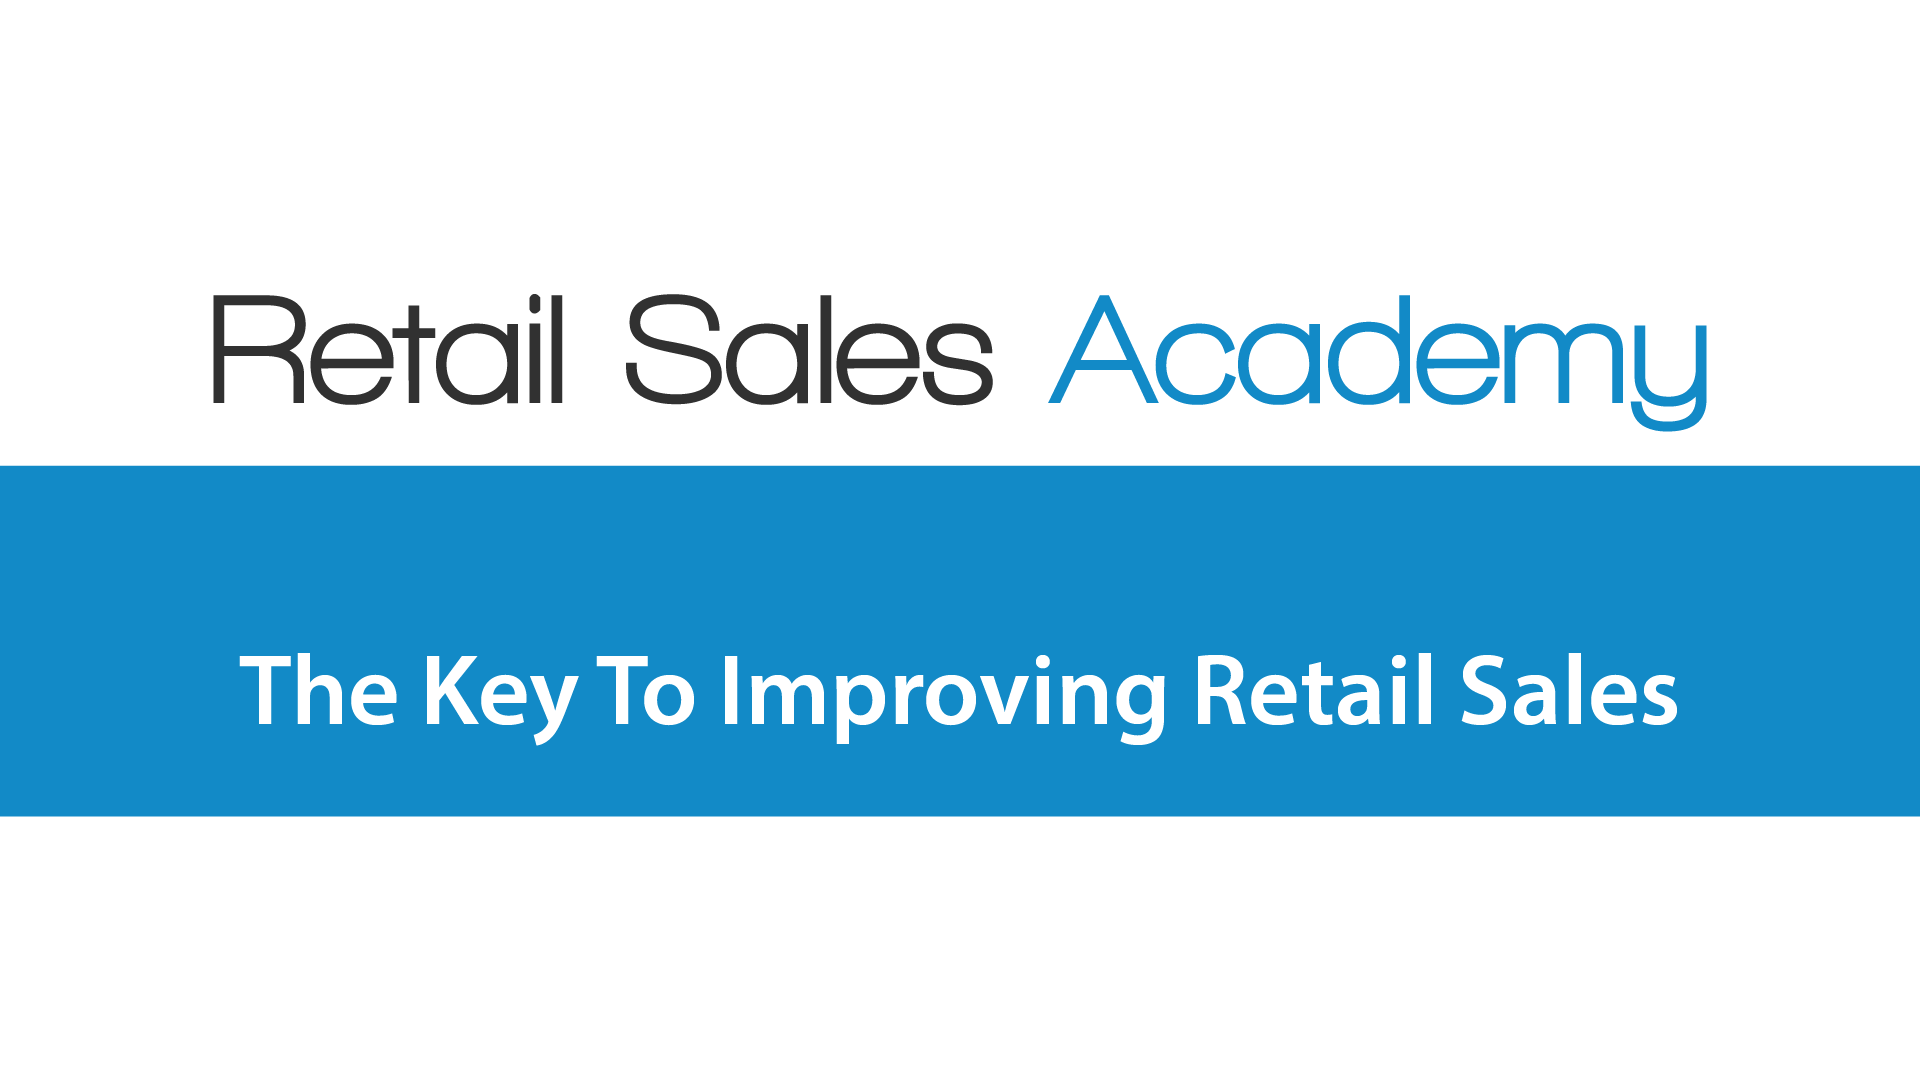 The Key To Improving Retail Sales The Key To Improving Retail Sales